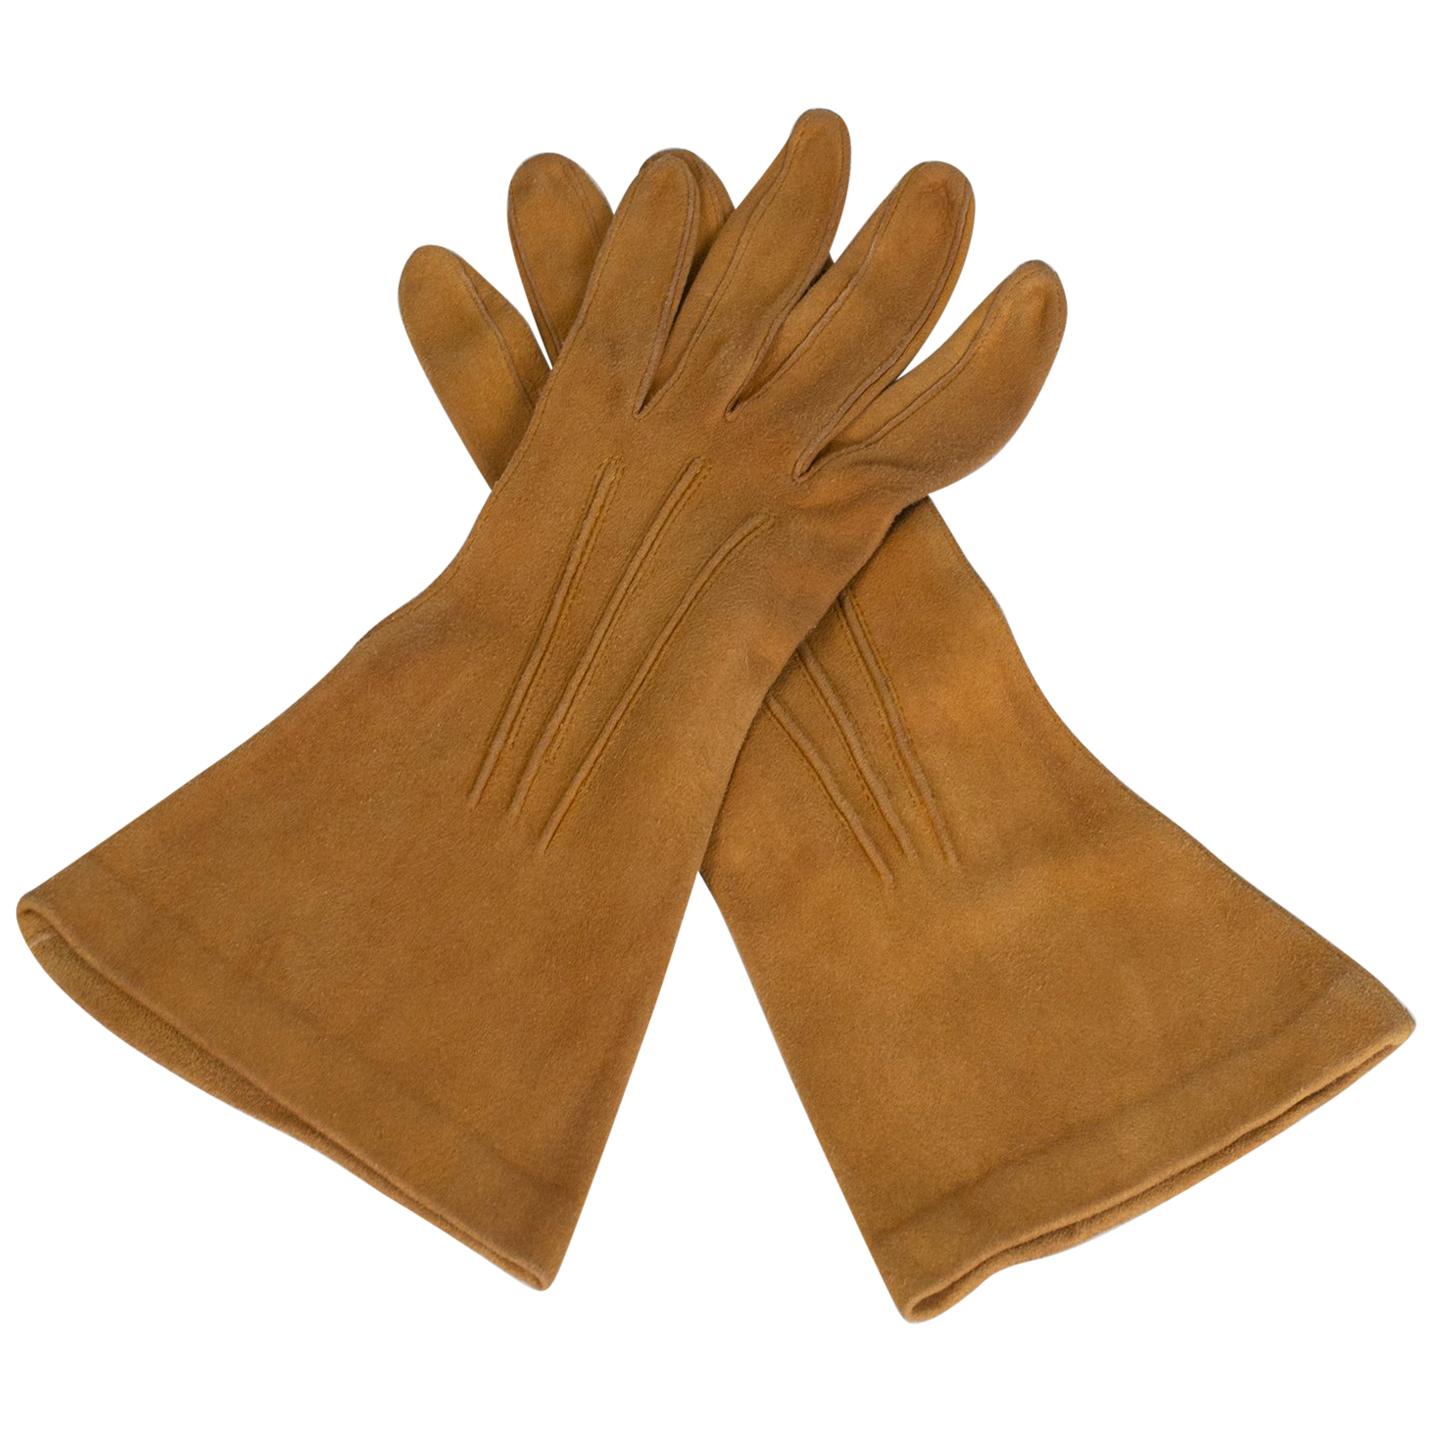 Saddle Tan Suede Three-Point Flared Gauntlet Forearm Gloves, France - S, 1960s